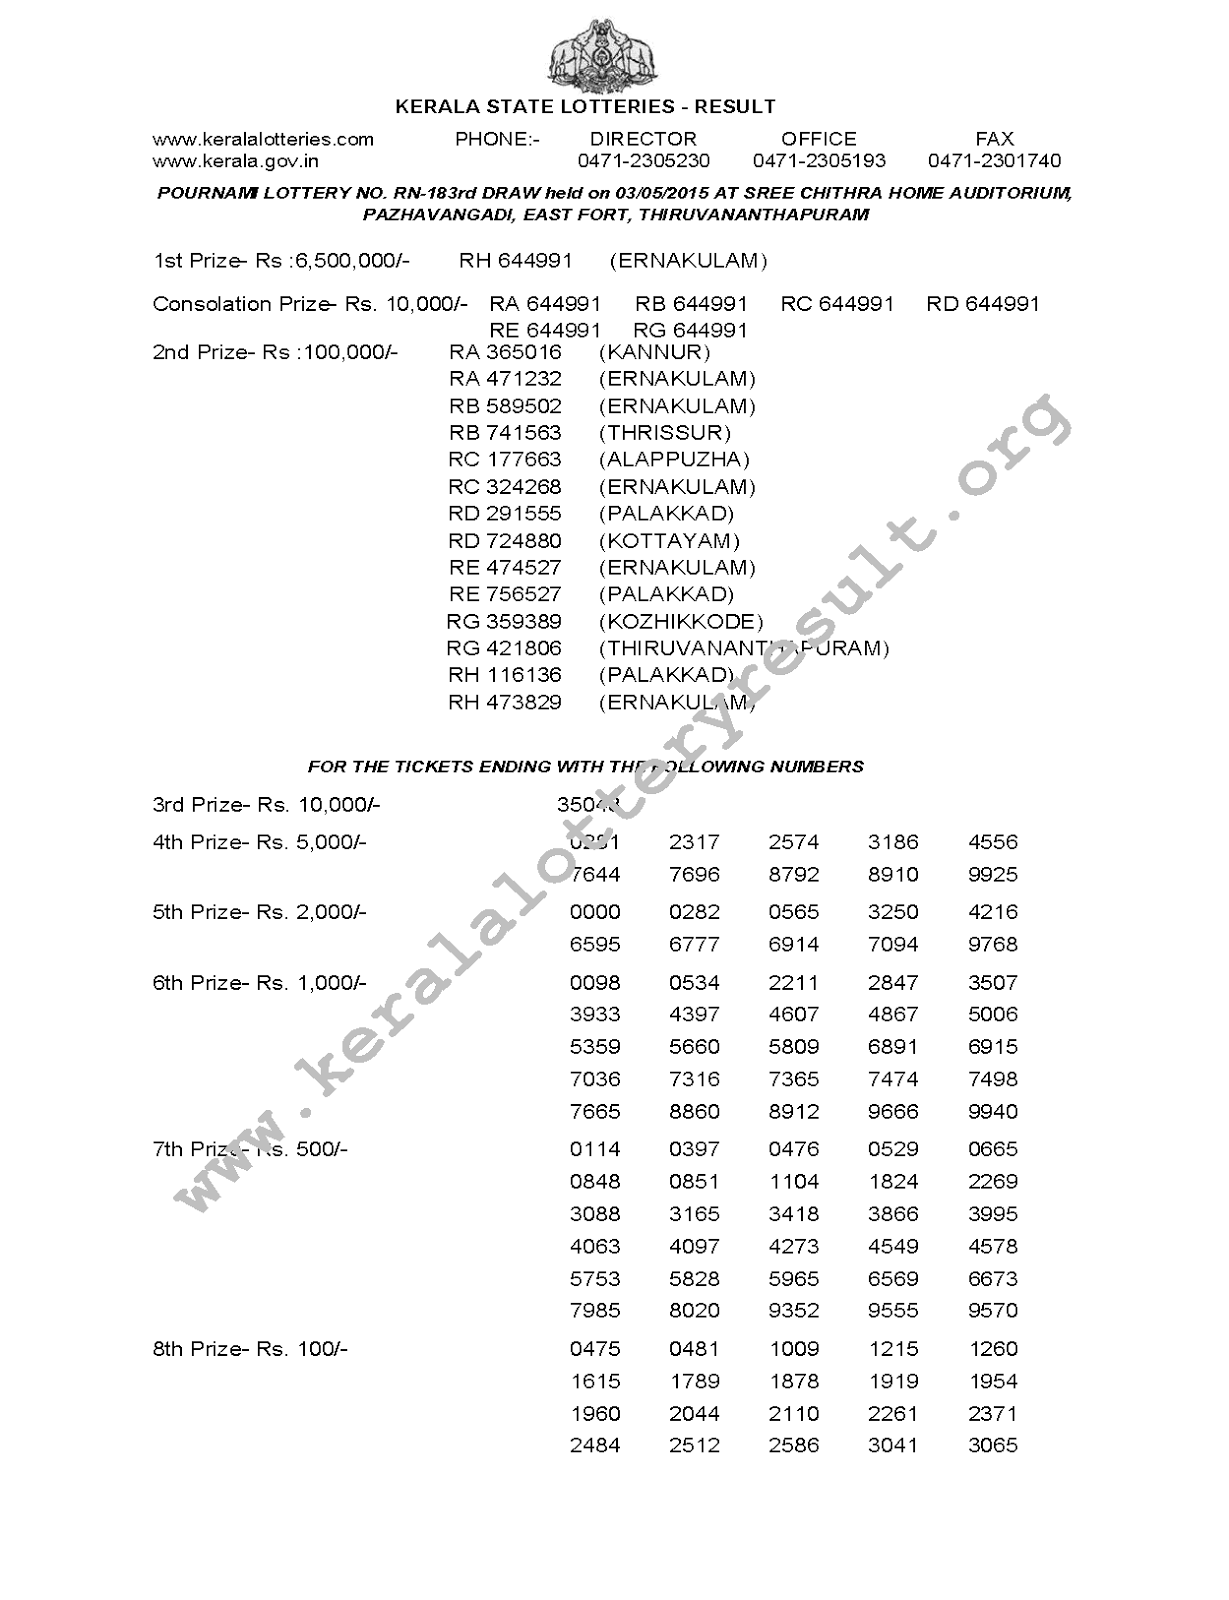 POURNAMI Lottery RN 183 Result 3-5-2015